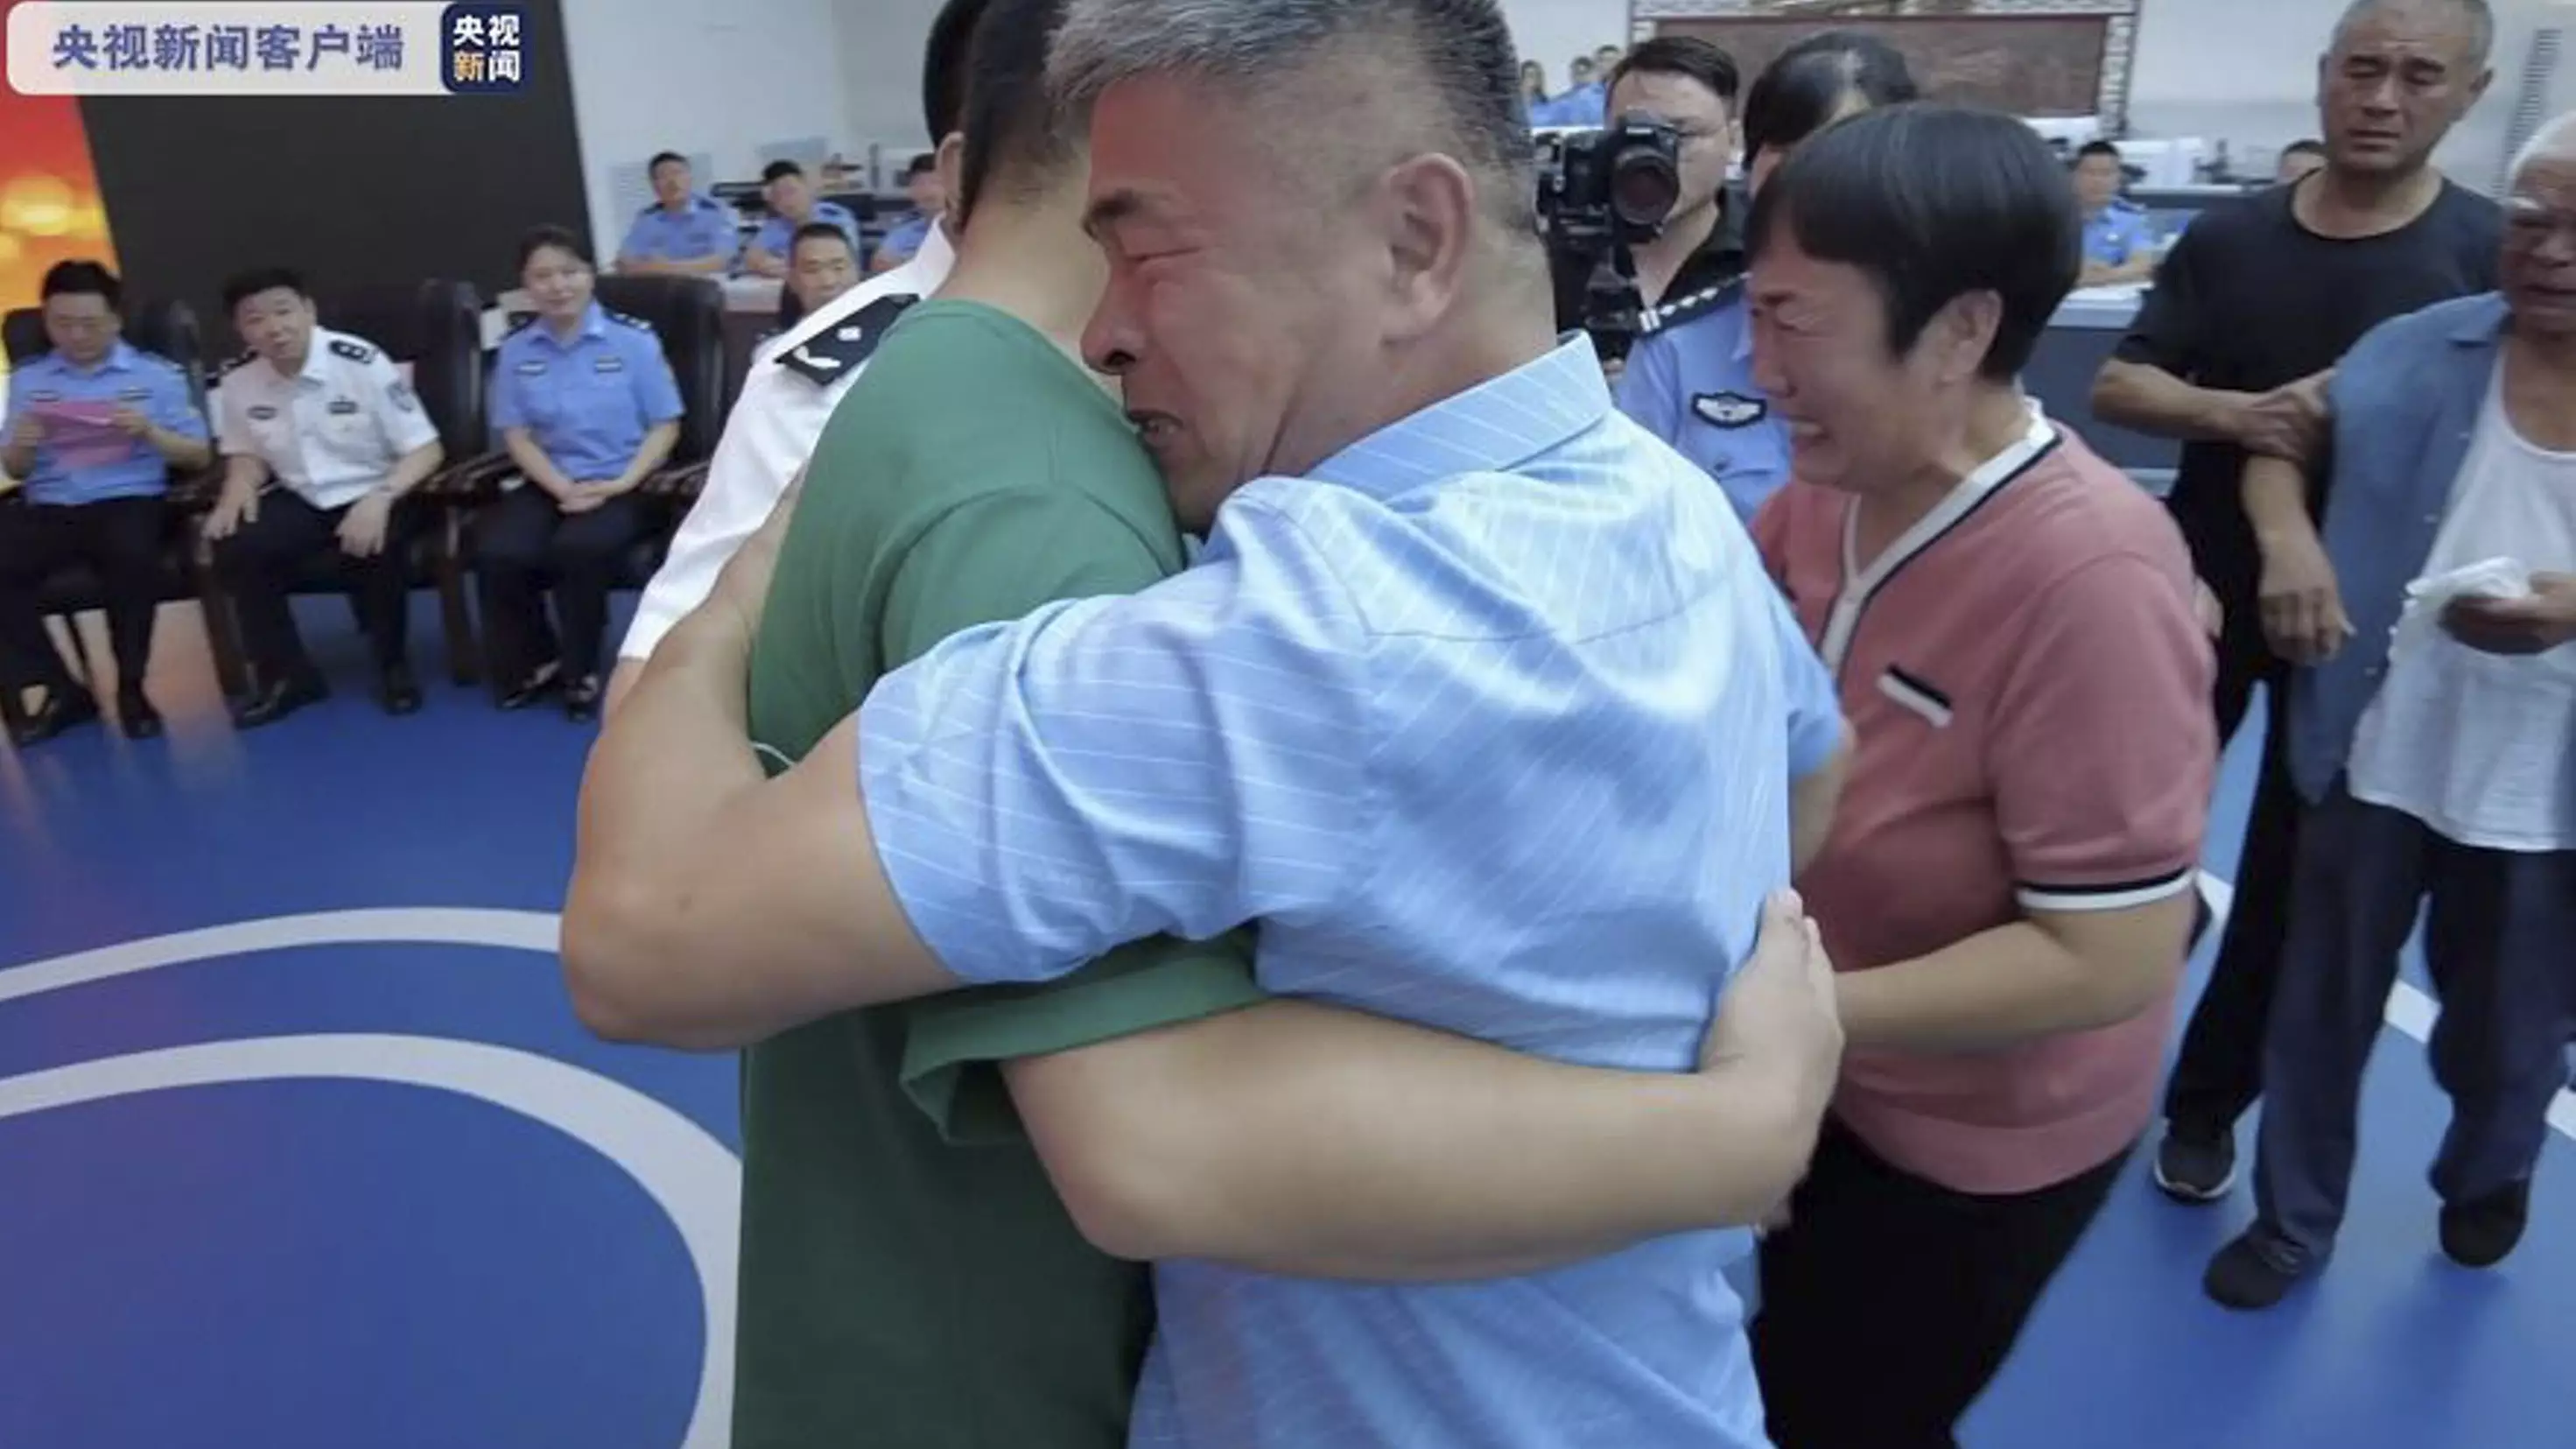 Father Reunites With Abducted Son After Spending 24 Years Searching For Him